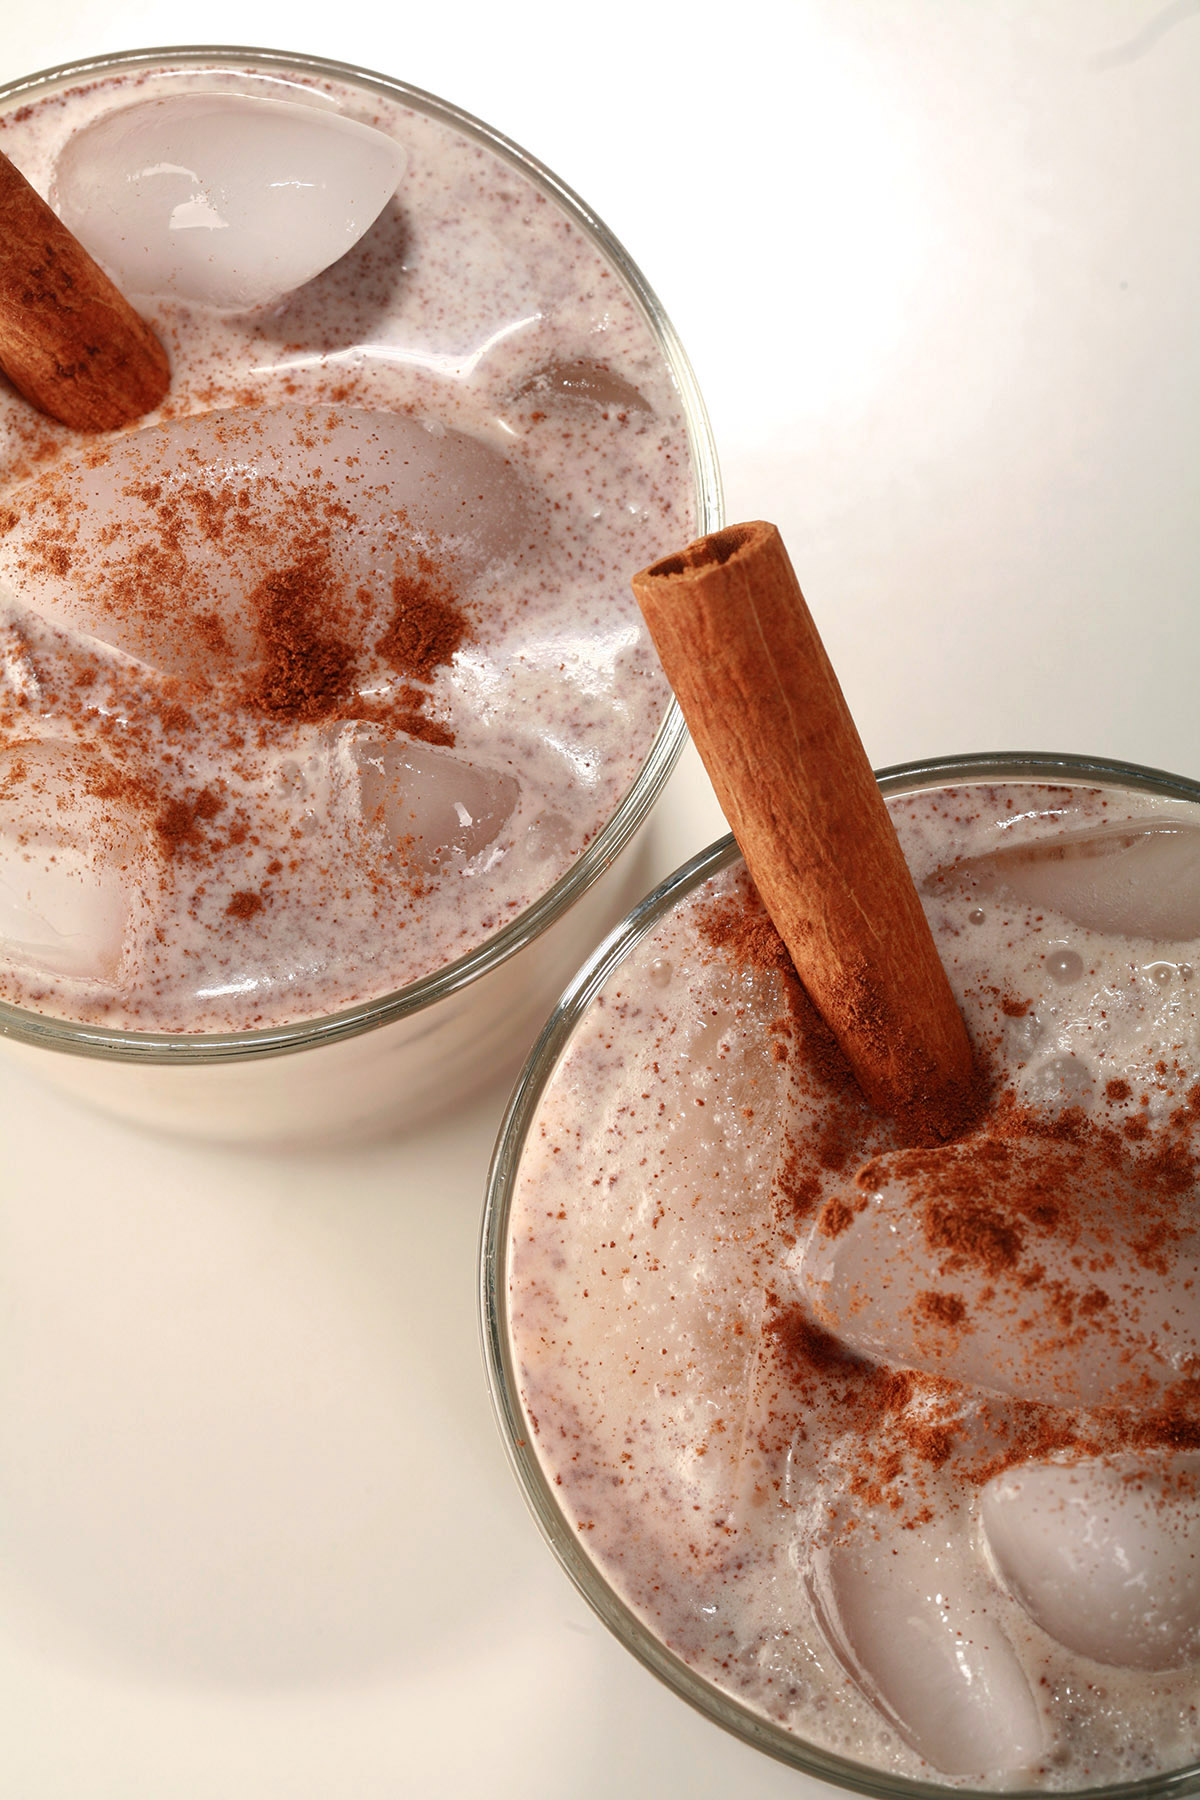 2 glasses of keto rumchata, garnished with a sinnamon stick and sprinkle of cinnamon.